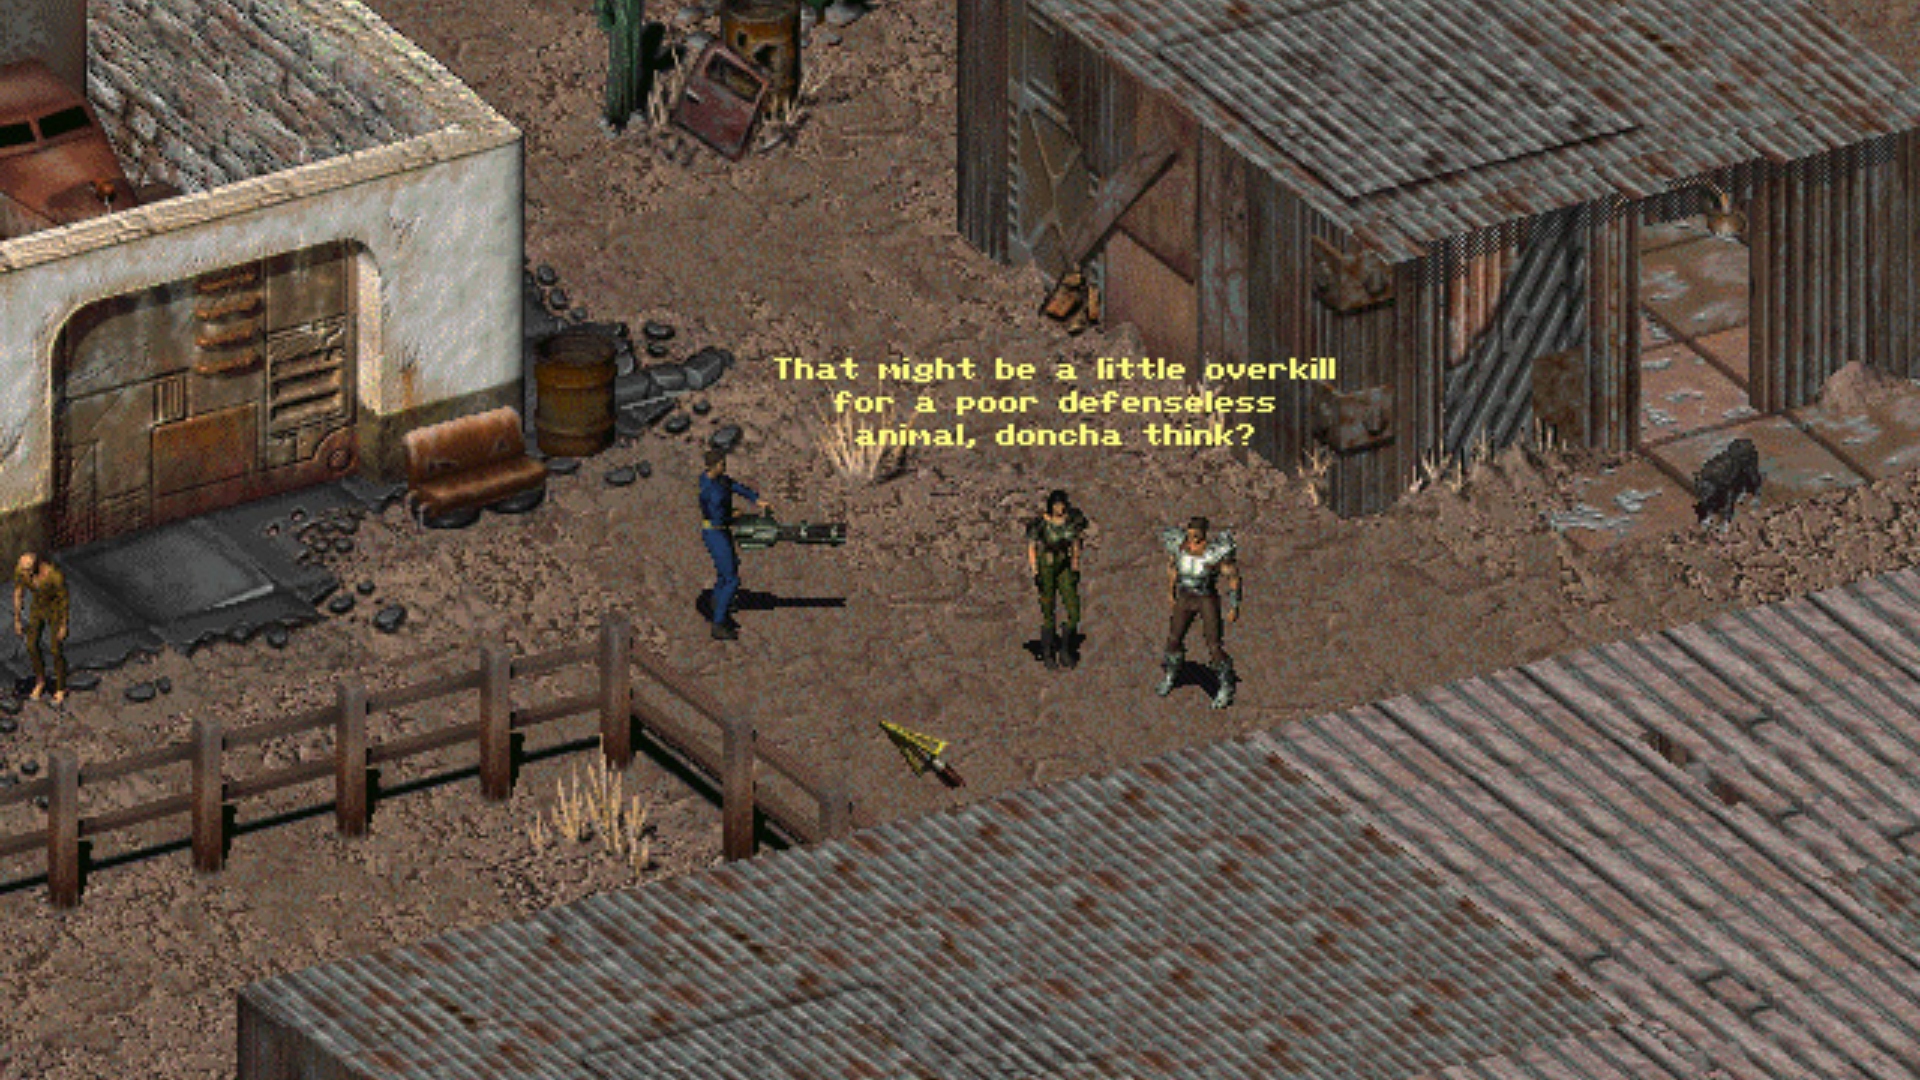 Fallout Remake: A Wasteland settlement from classic RPG game Fallout